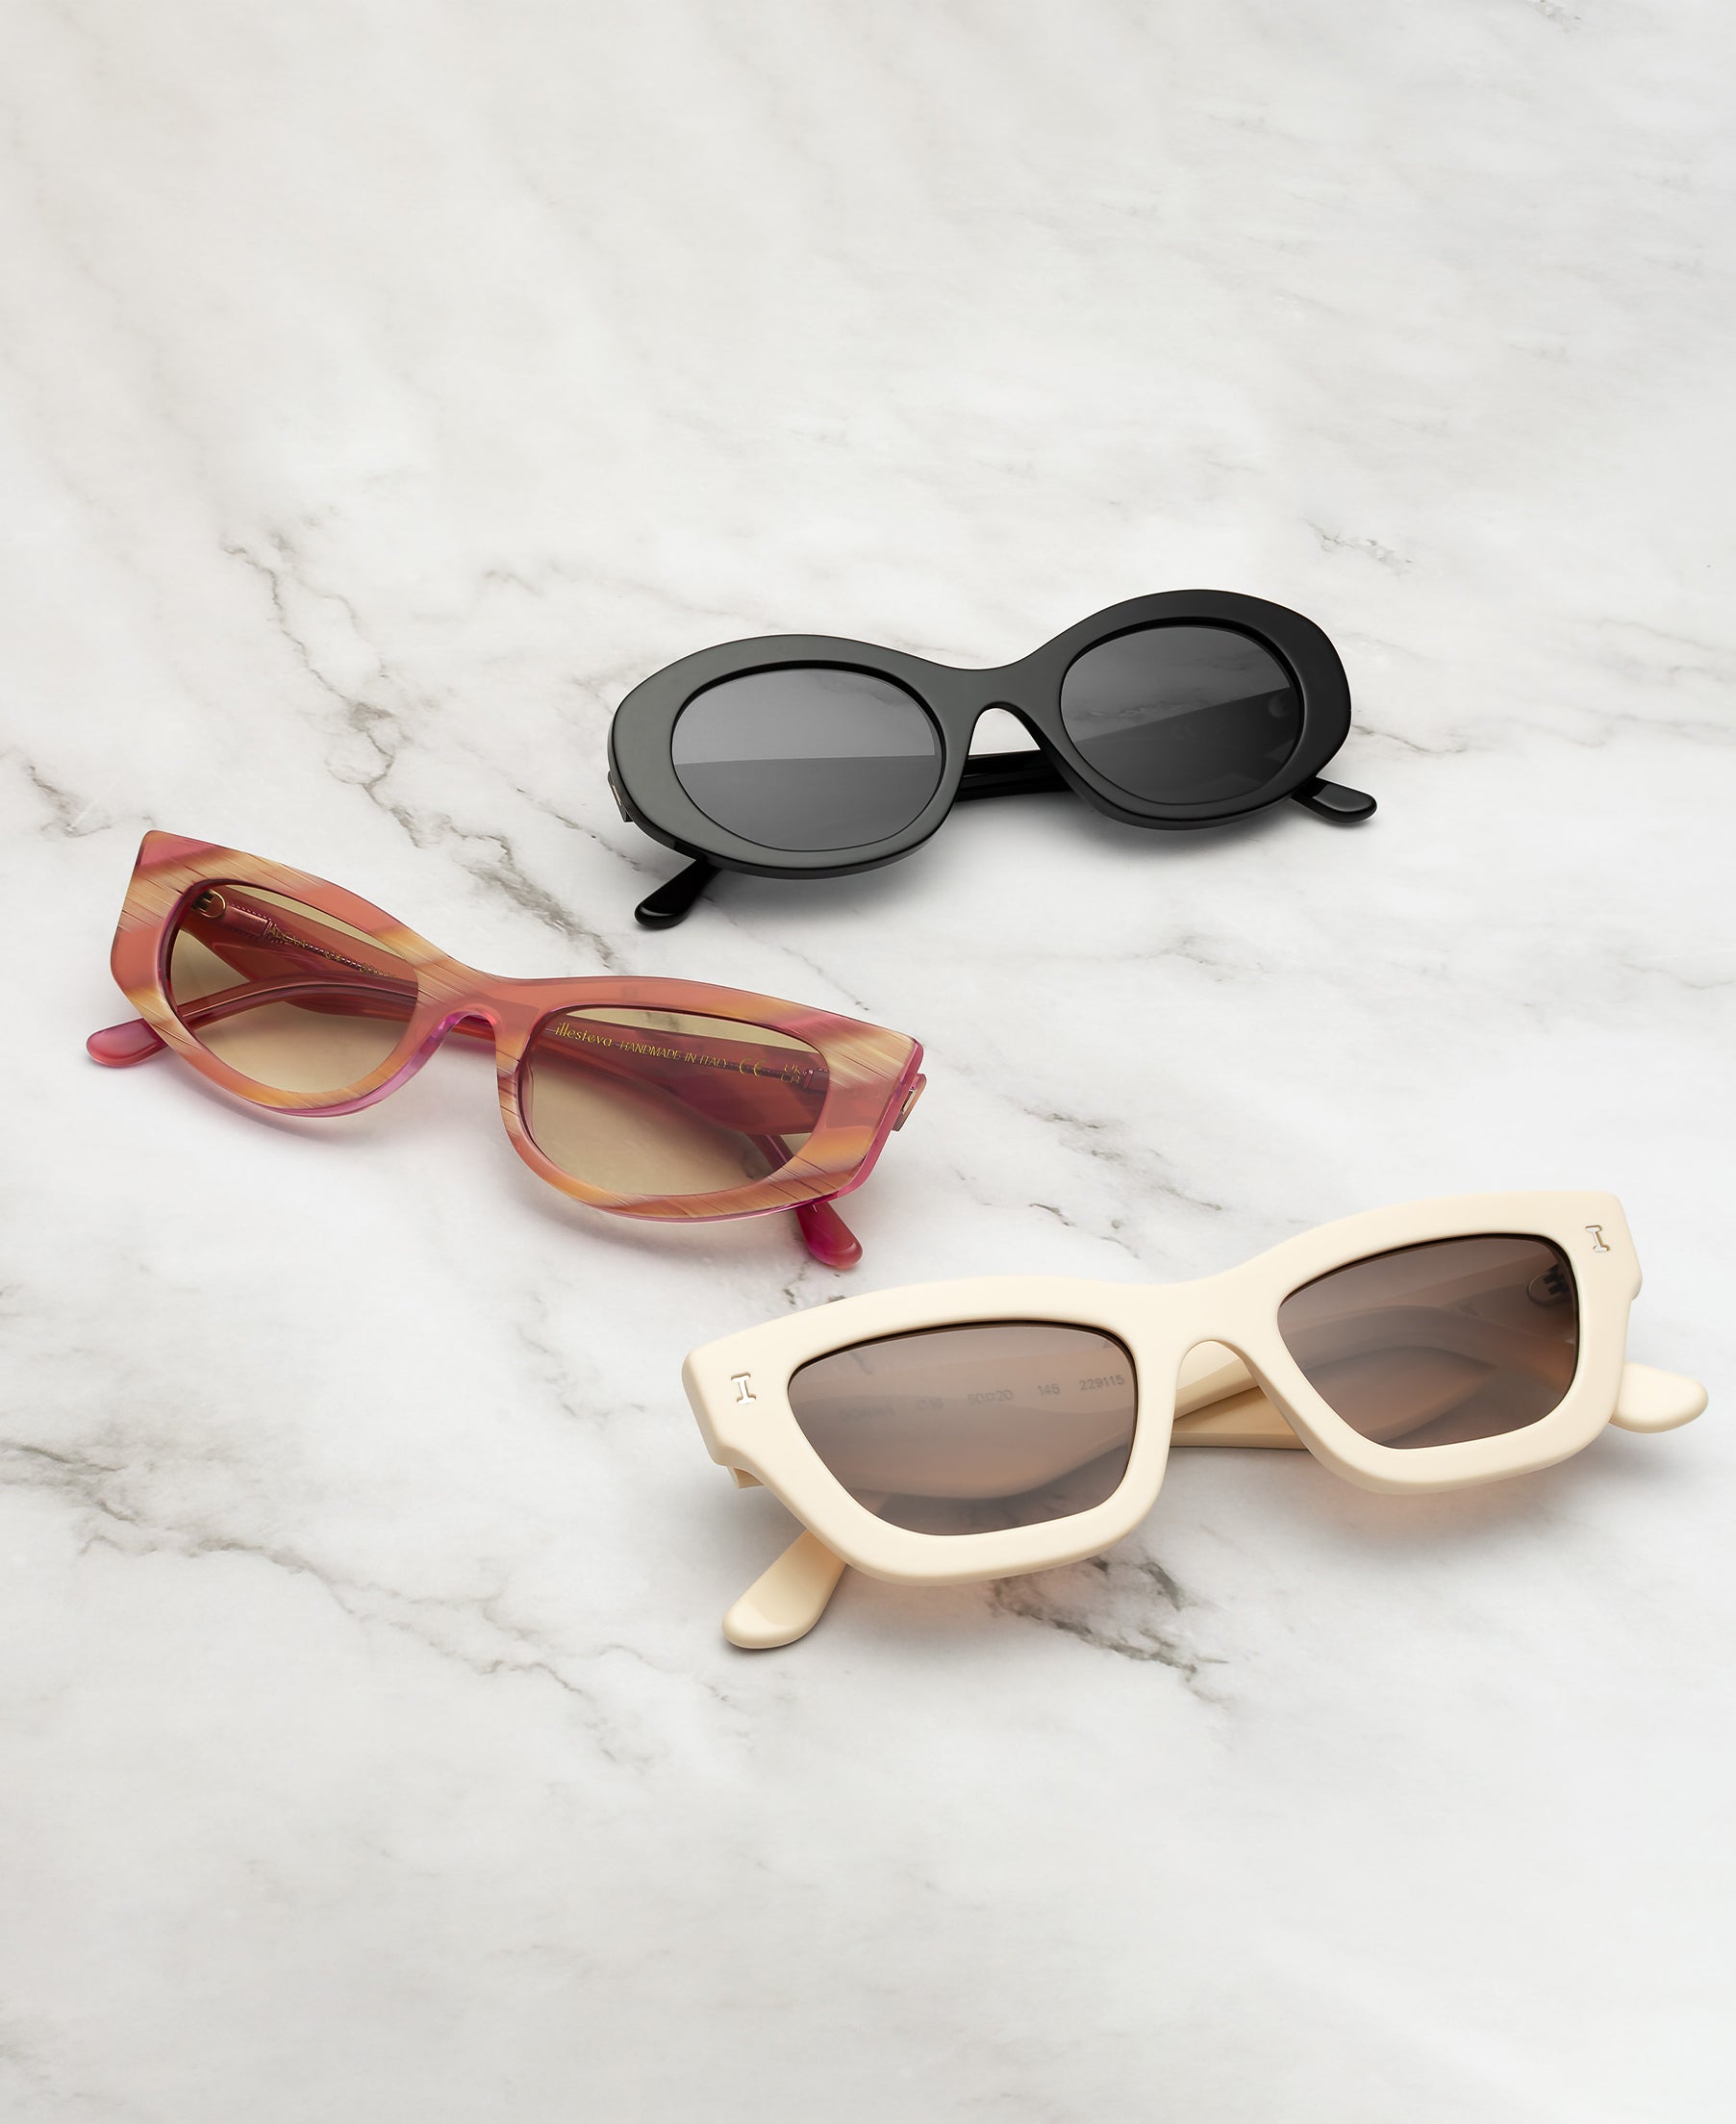 Luna Sunglasses in Black, Alexa Sunglasses in Monte Rosa, and Donna in Cream displayed on a marble background